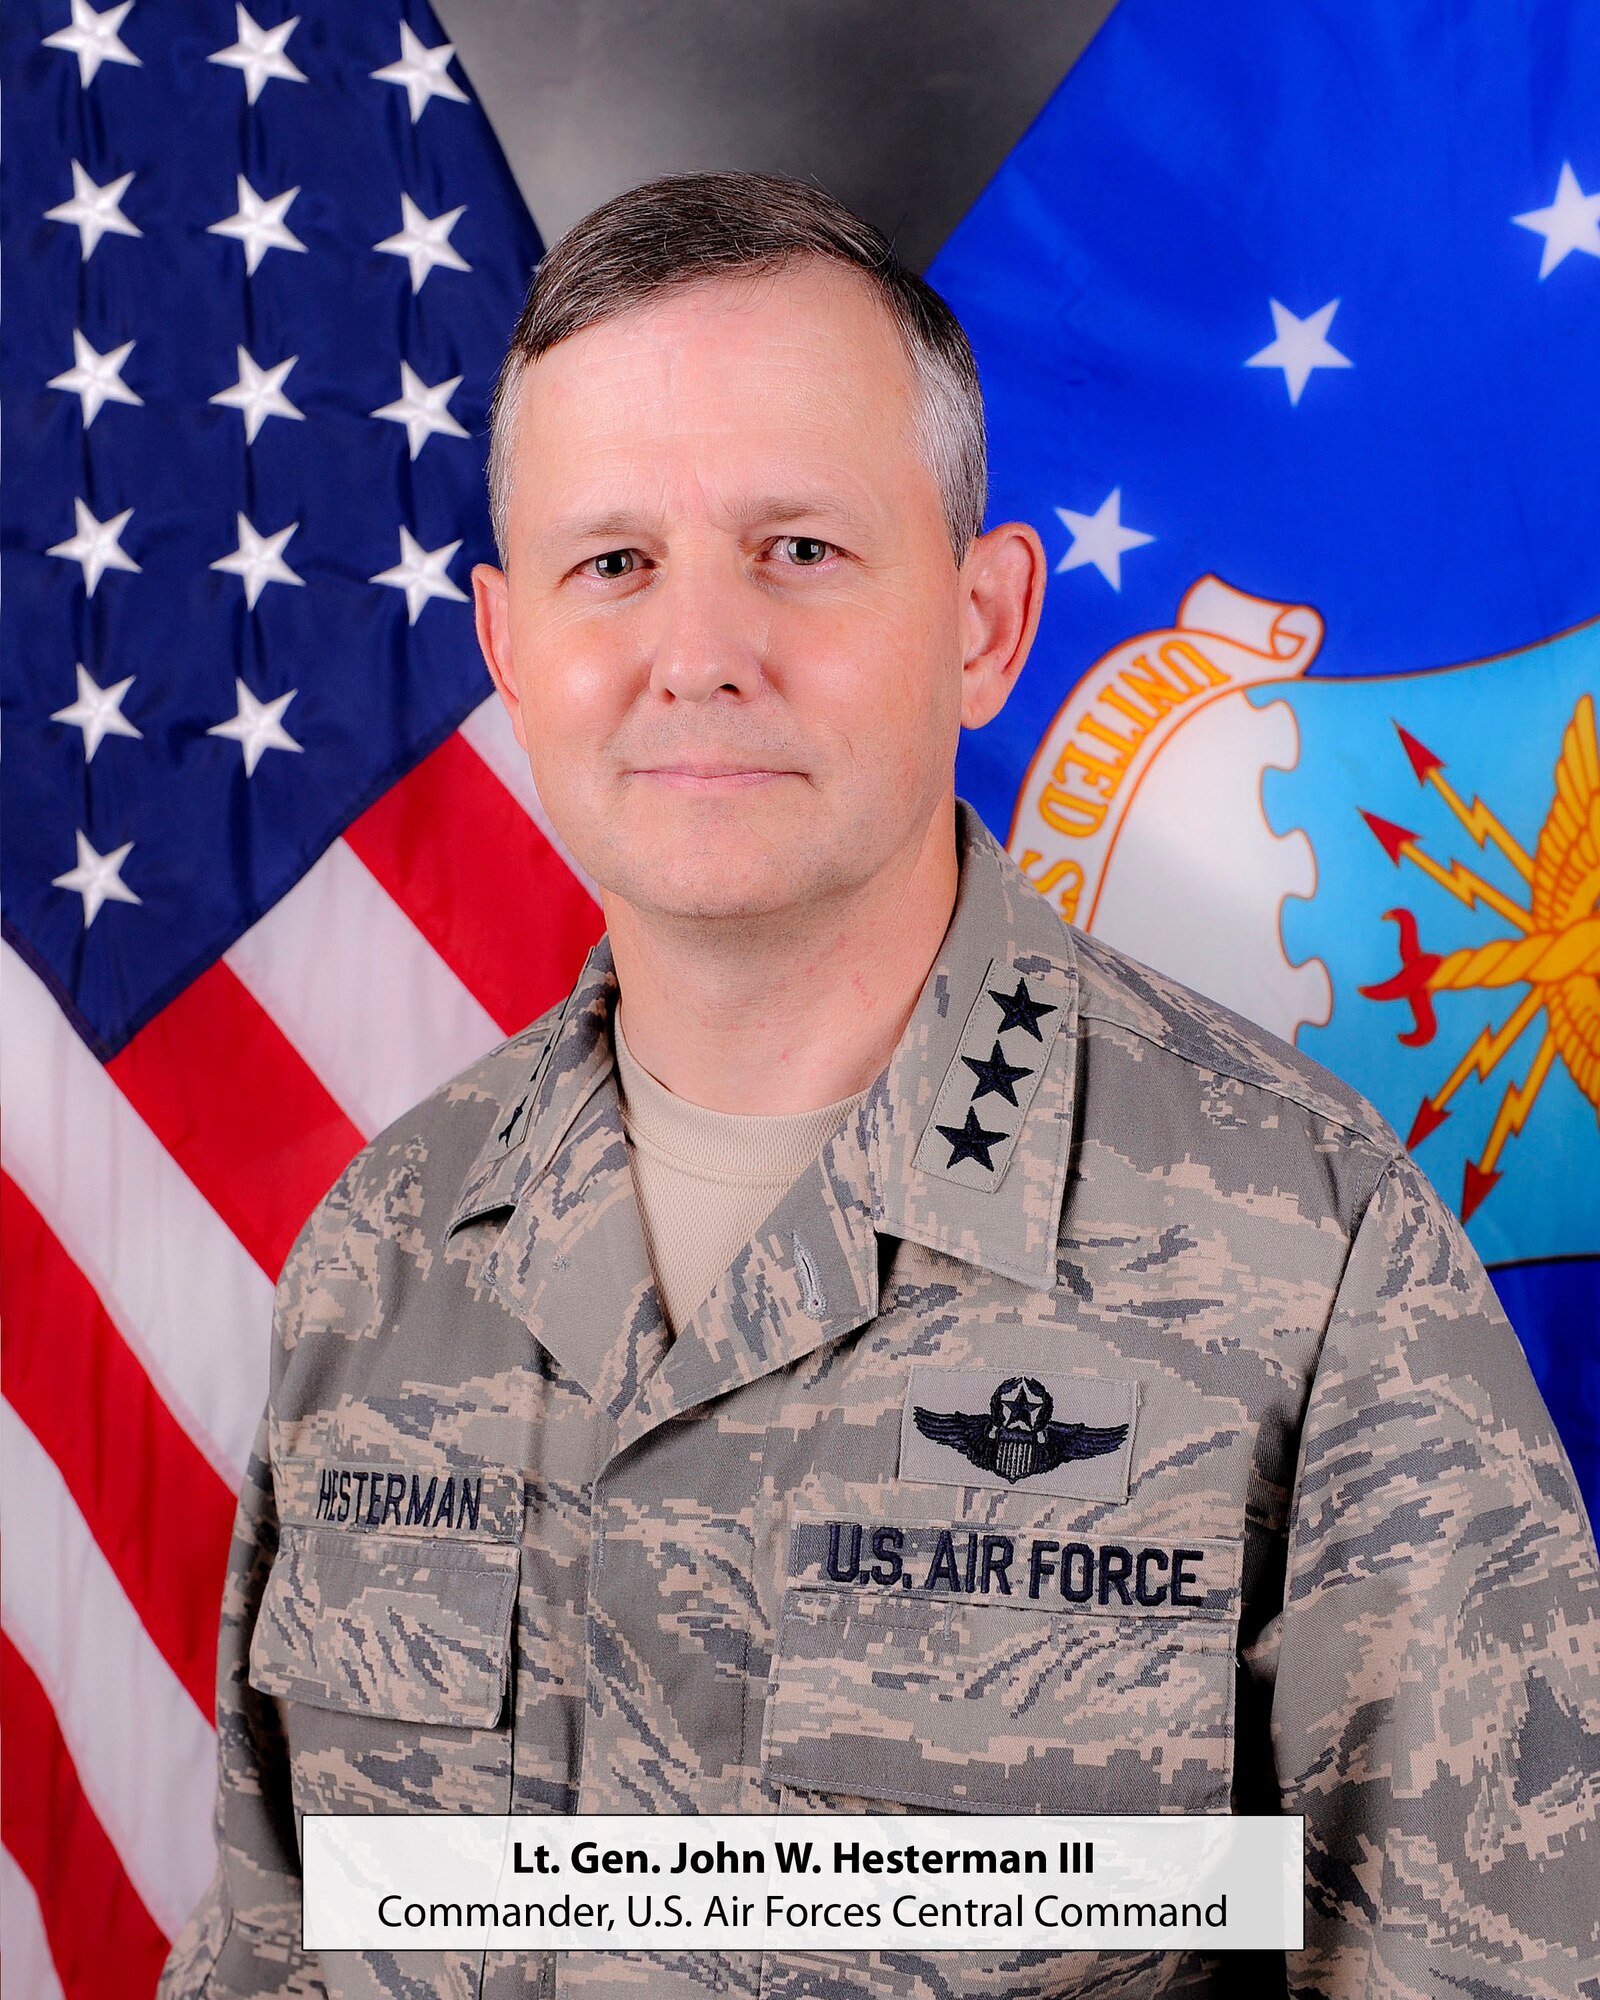 Lt. Gen. John Hesterman is the Commander, U.S. Air Forces Central Command, Southwest Asia. As the Air Component Commander for U.S. Central Command, the general is responsible for developing contingency plans and conducting air operations in a 20-nation area of responsibility covering Central and Southwest Asia. (U.S. Air Force photo by Tech. Sgt. Joselito Aribuabo)